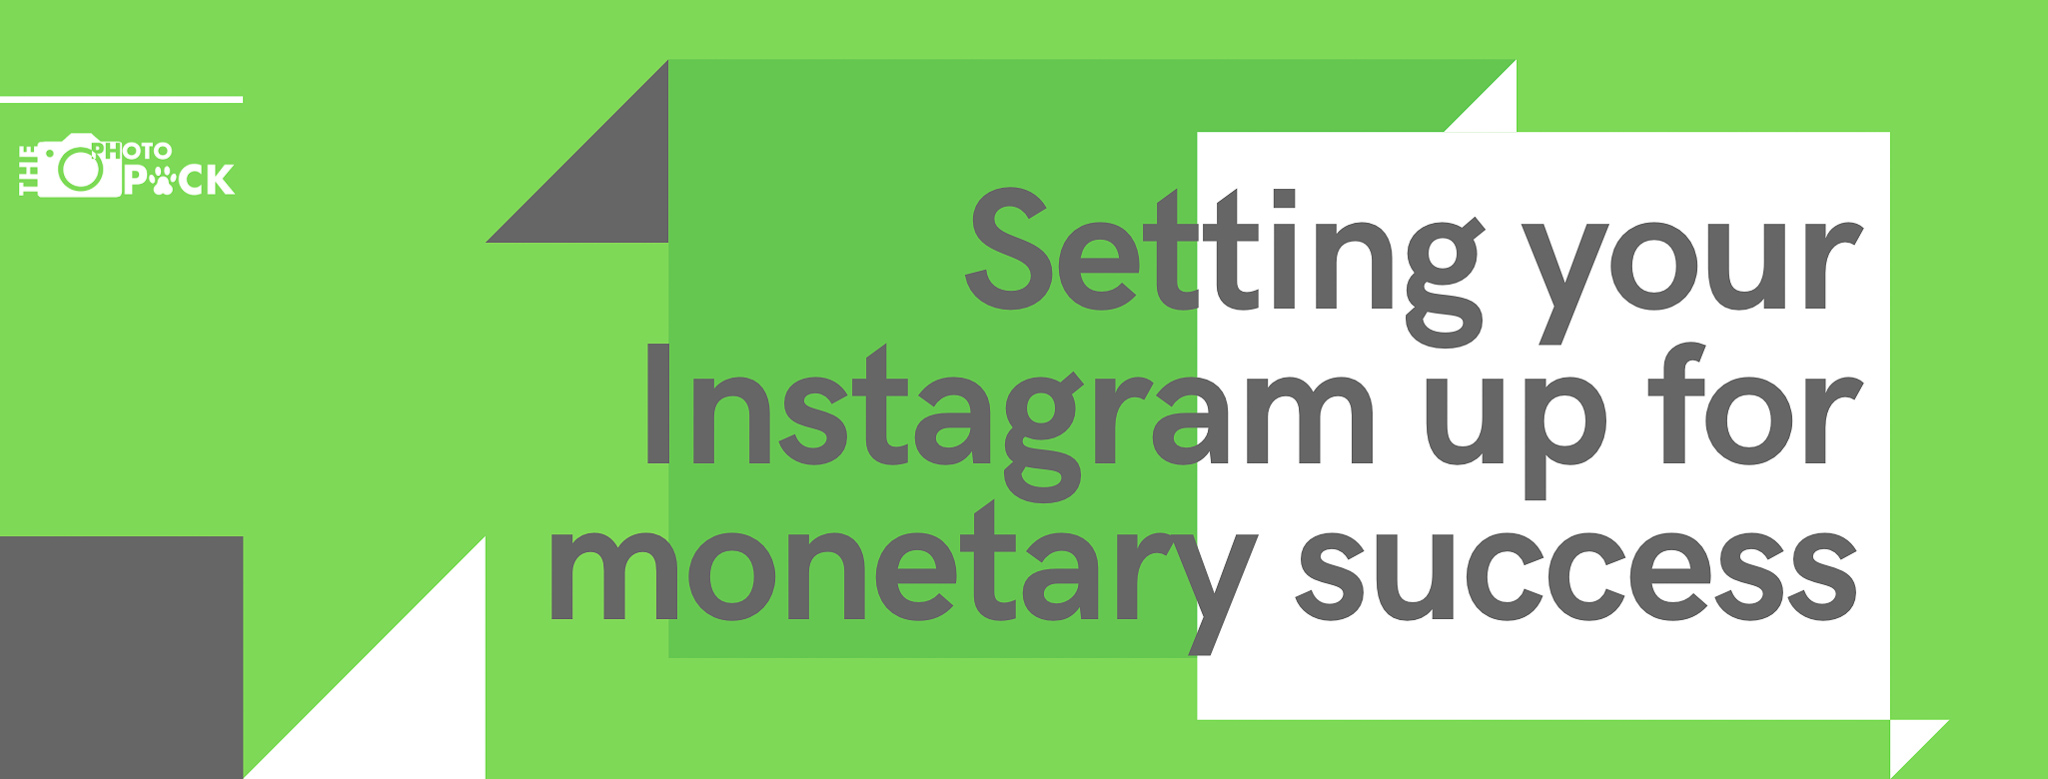 setting-up-your-instagram-account-for-monetary-success-hello-hound